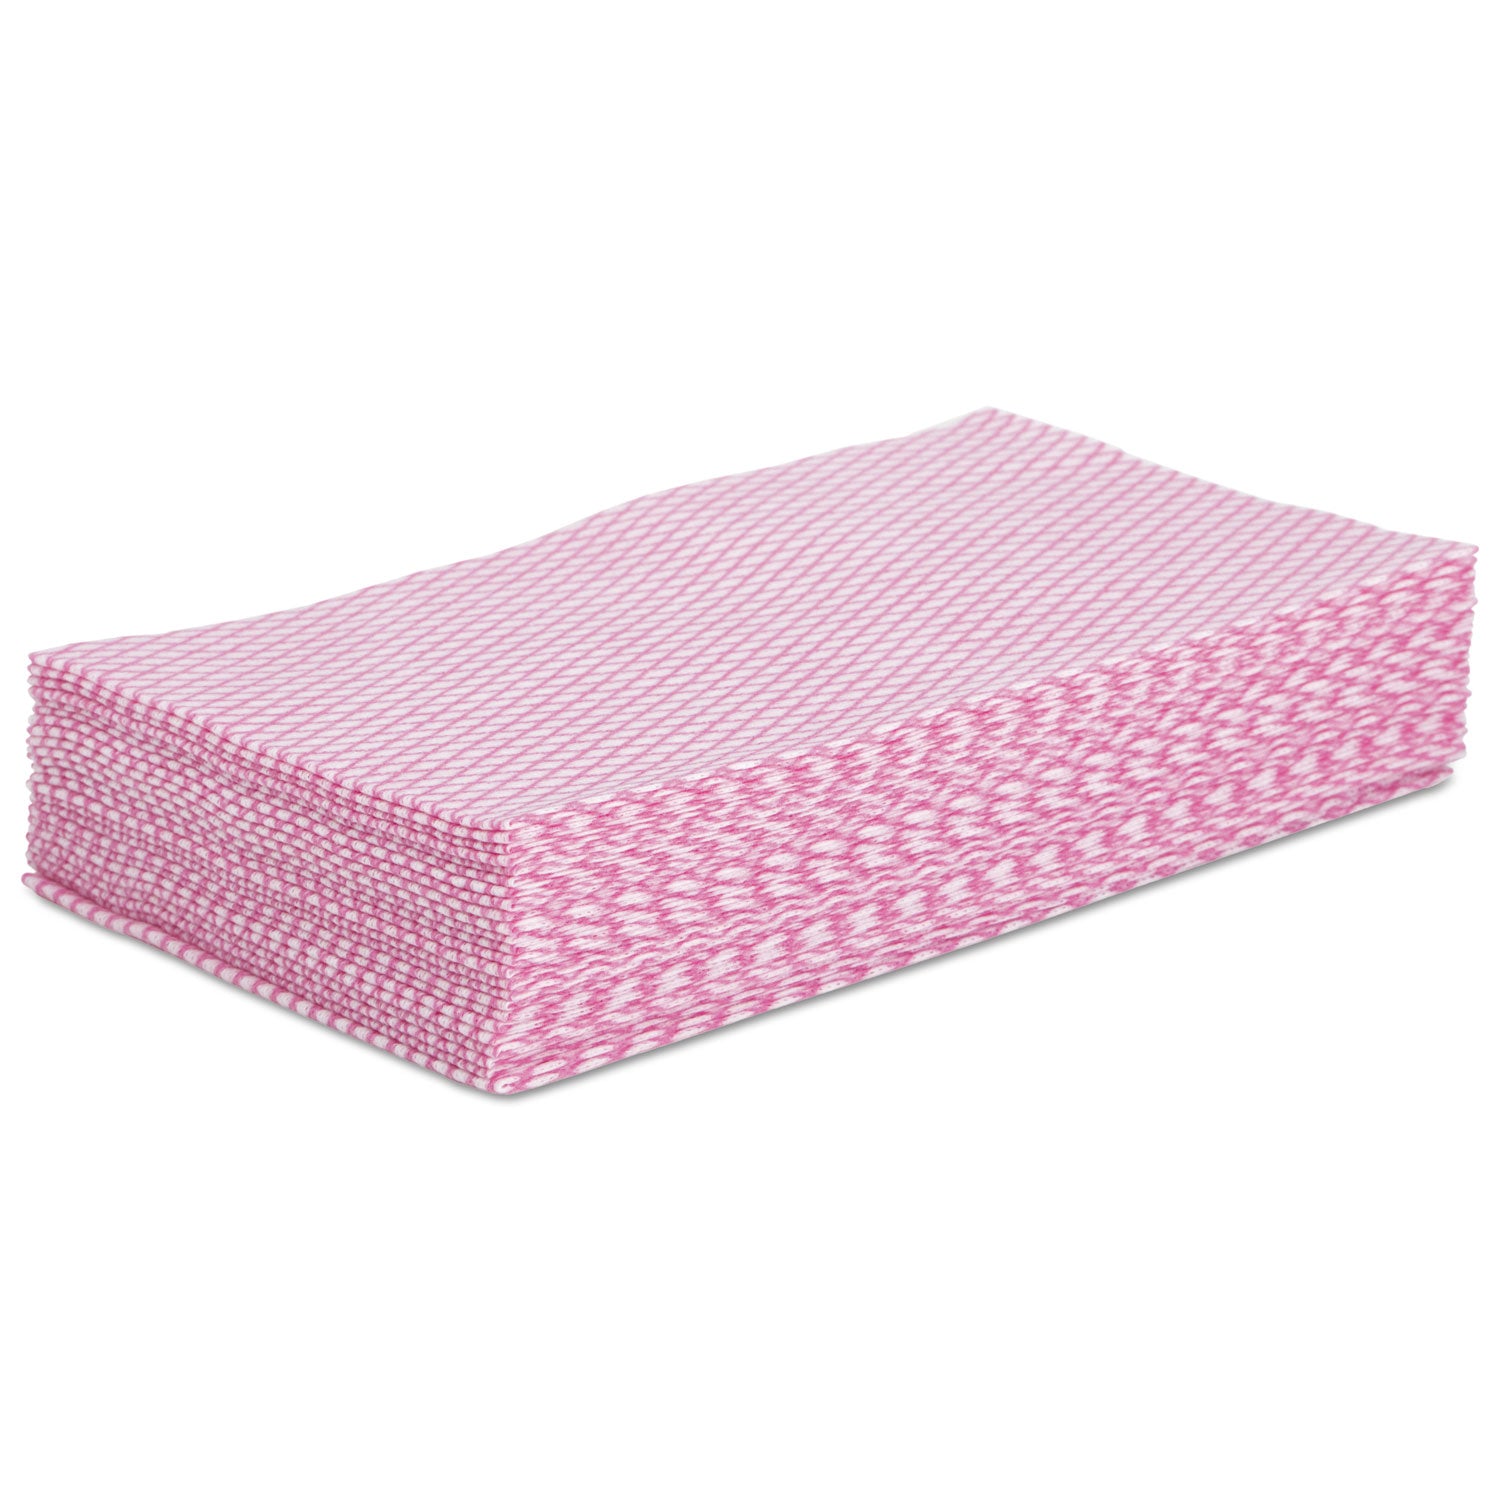 Foodservice Wipers, 12 x 21, Pink/White, 200/Carton - 